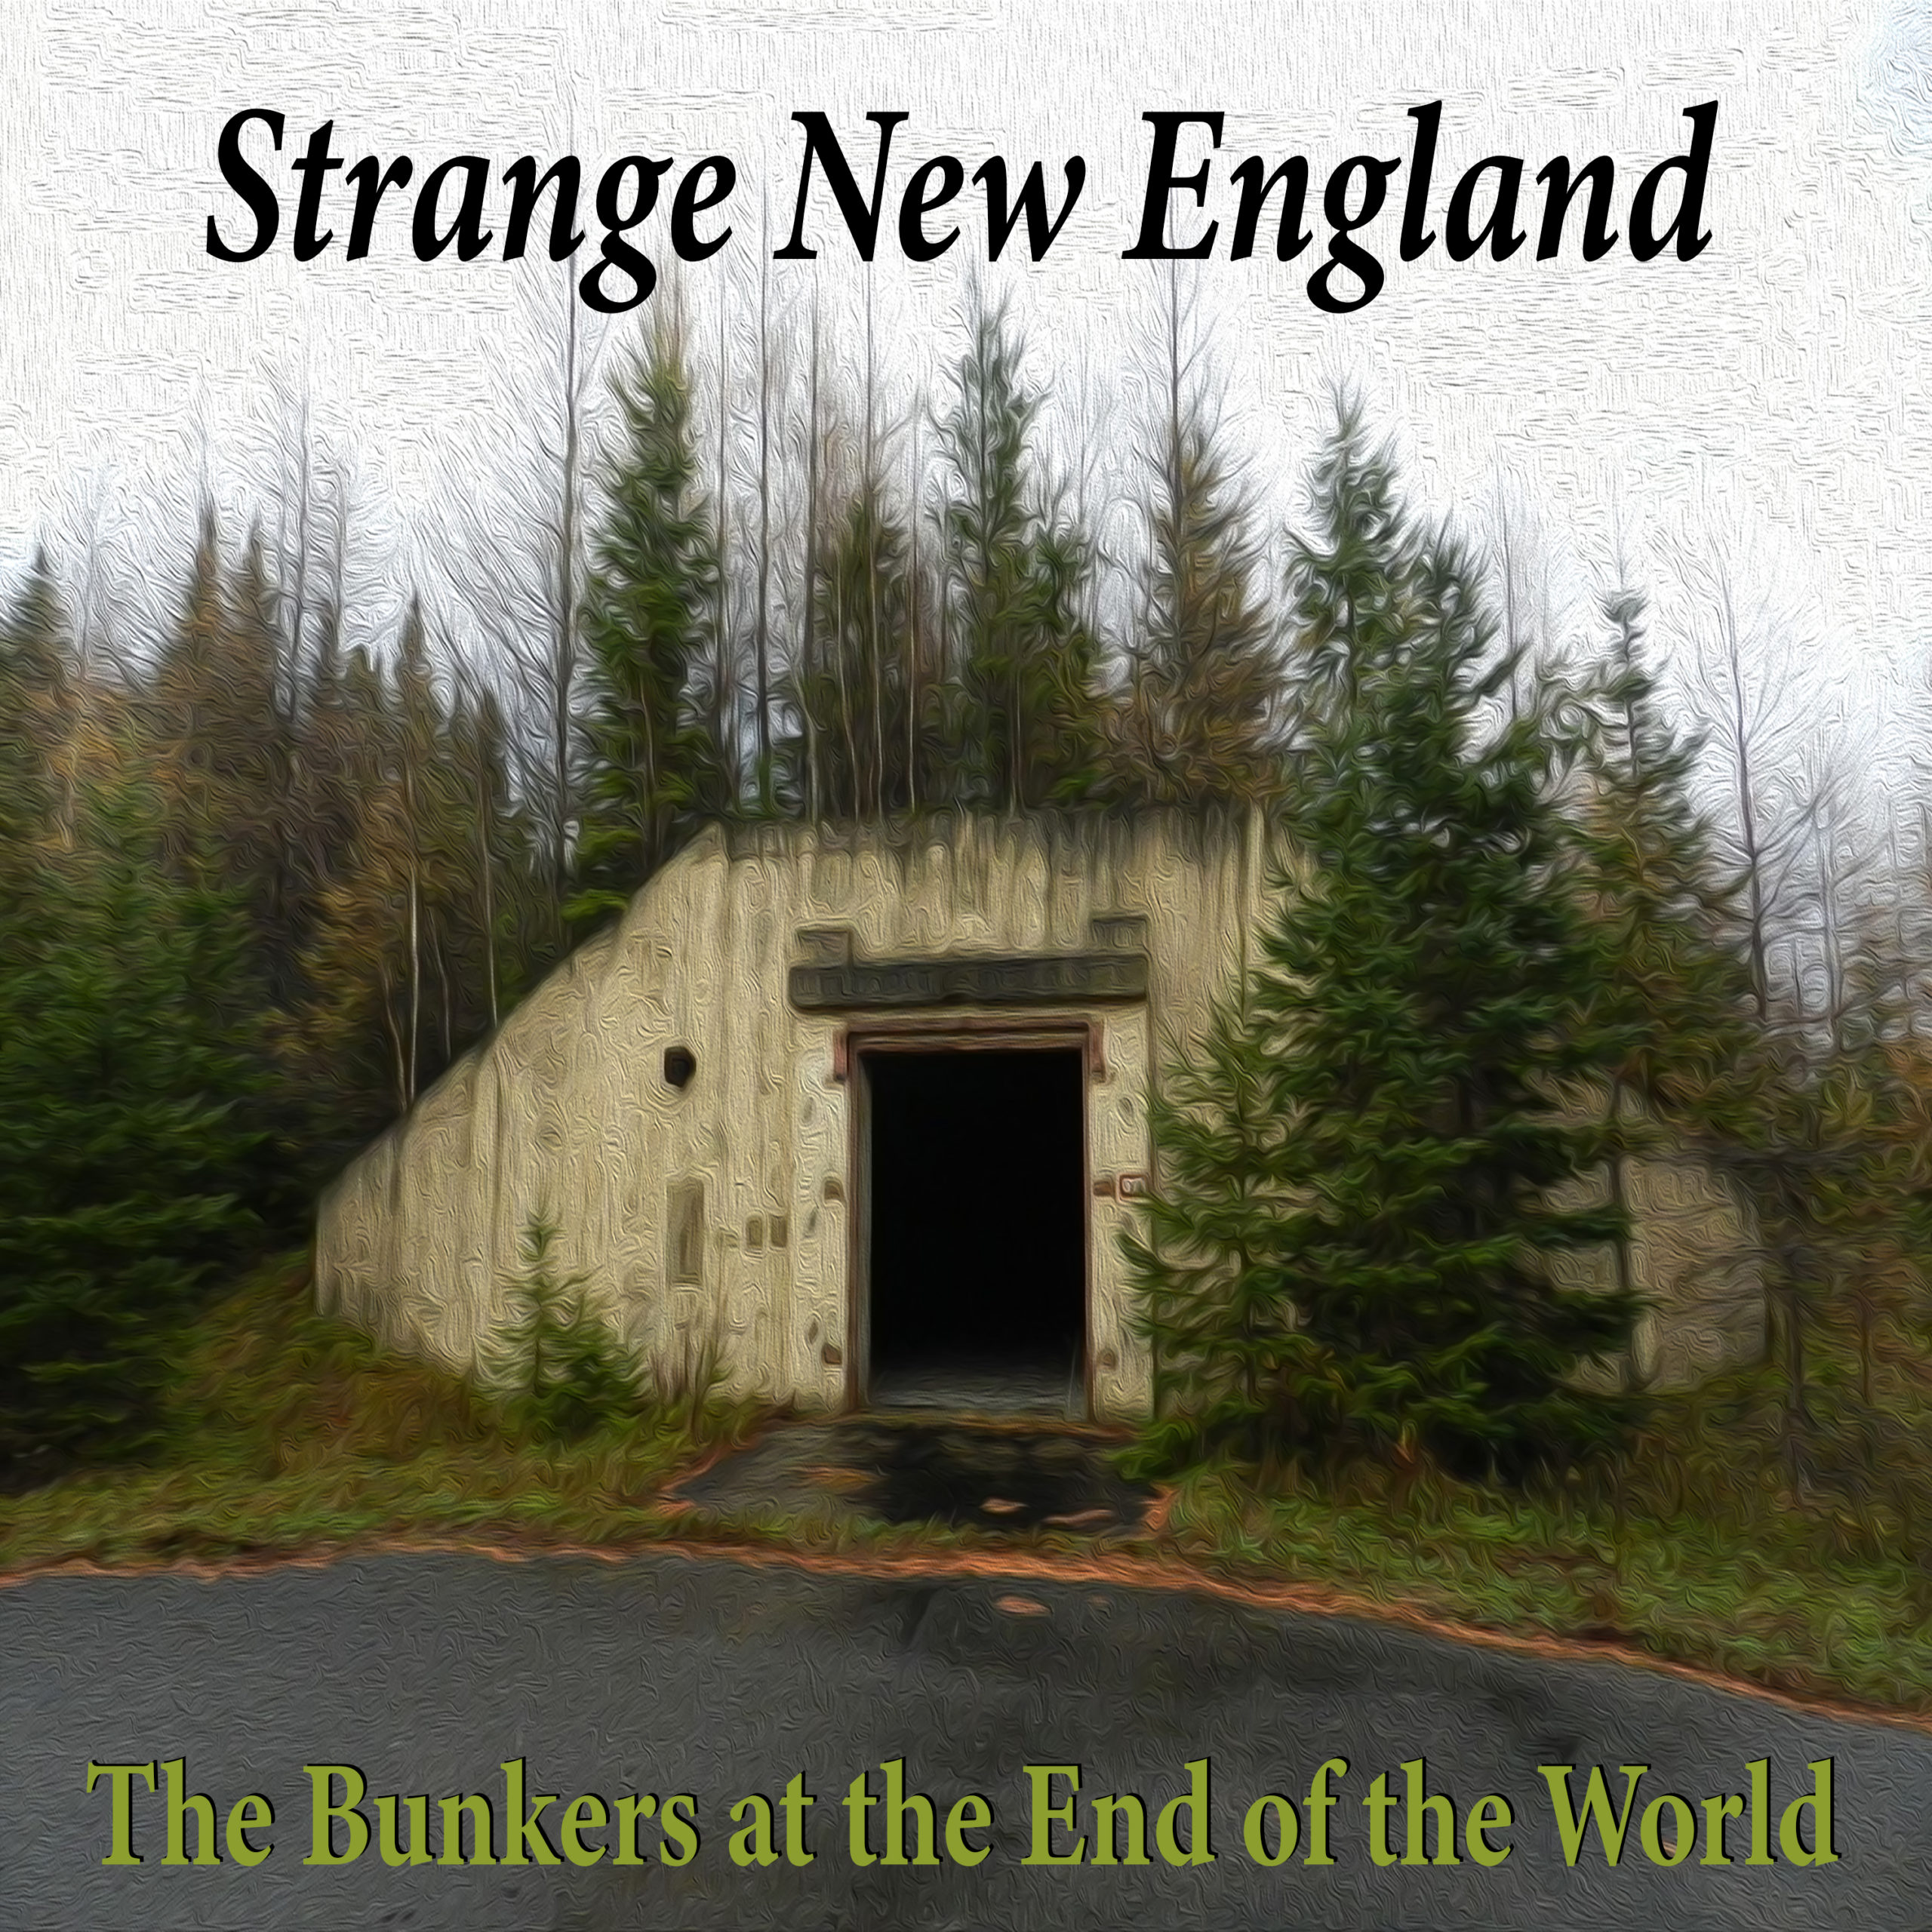 The Bunkers at the End of the World